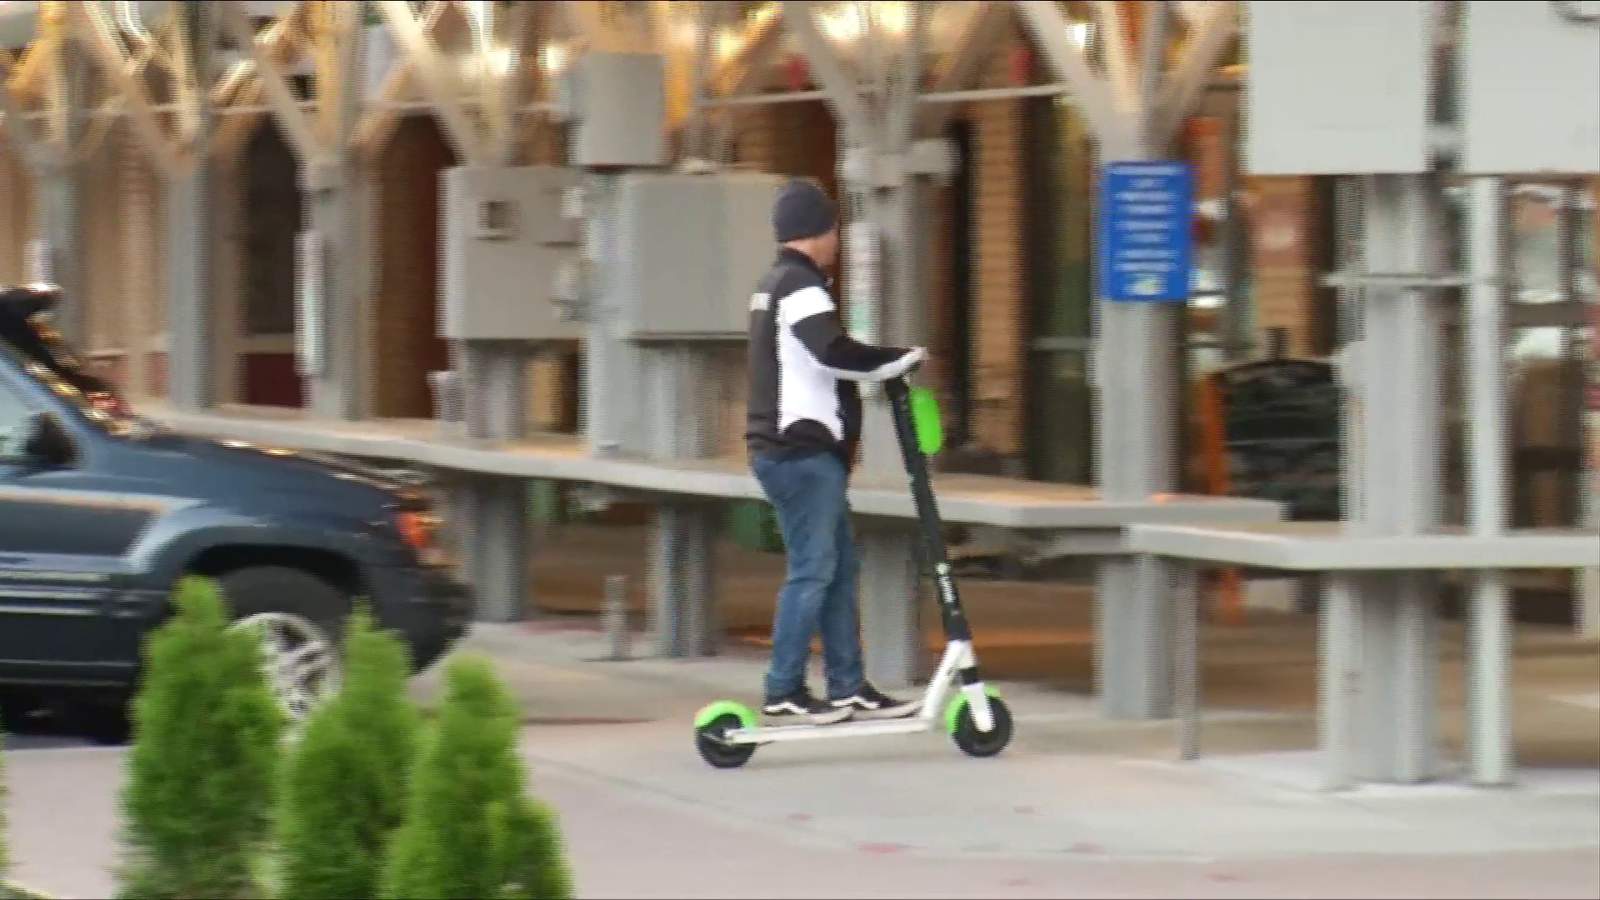 Lime scooters return to Roanoke, touted as socially-distant form of transportation